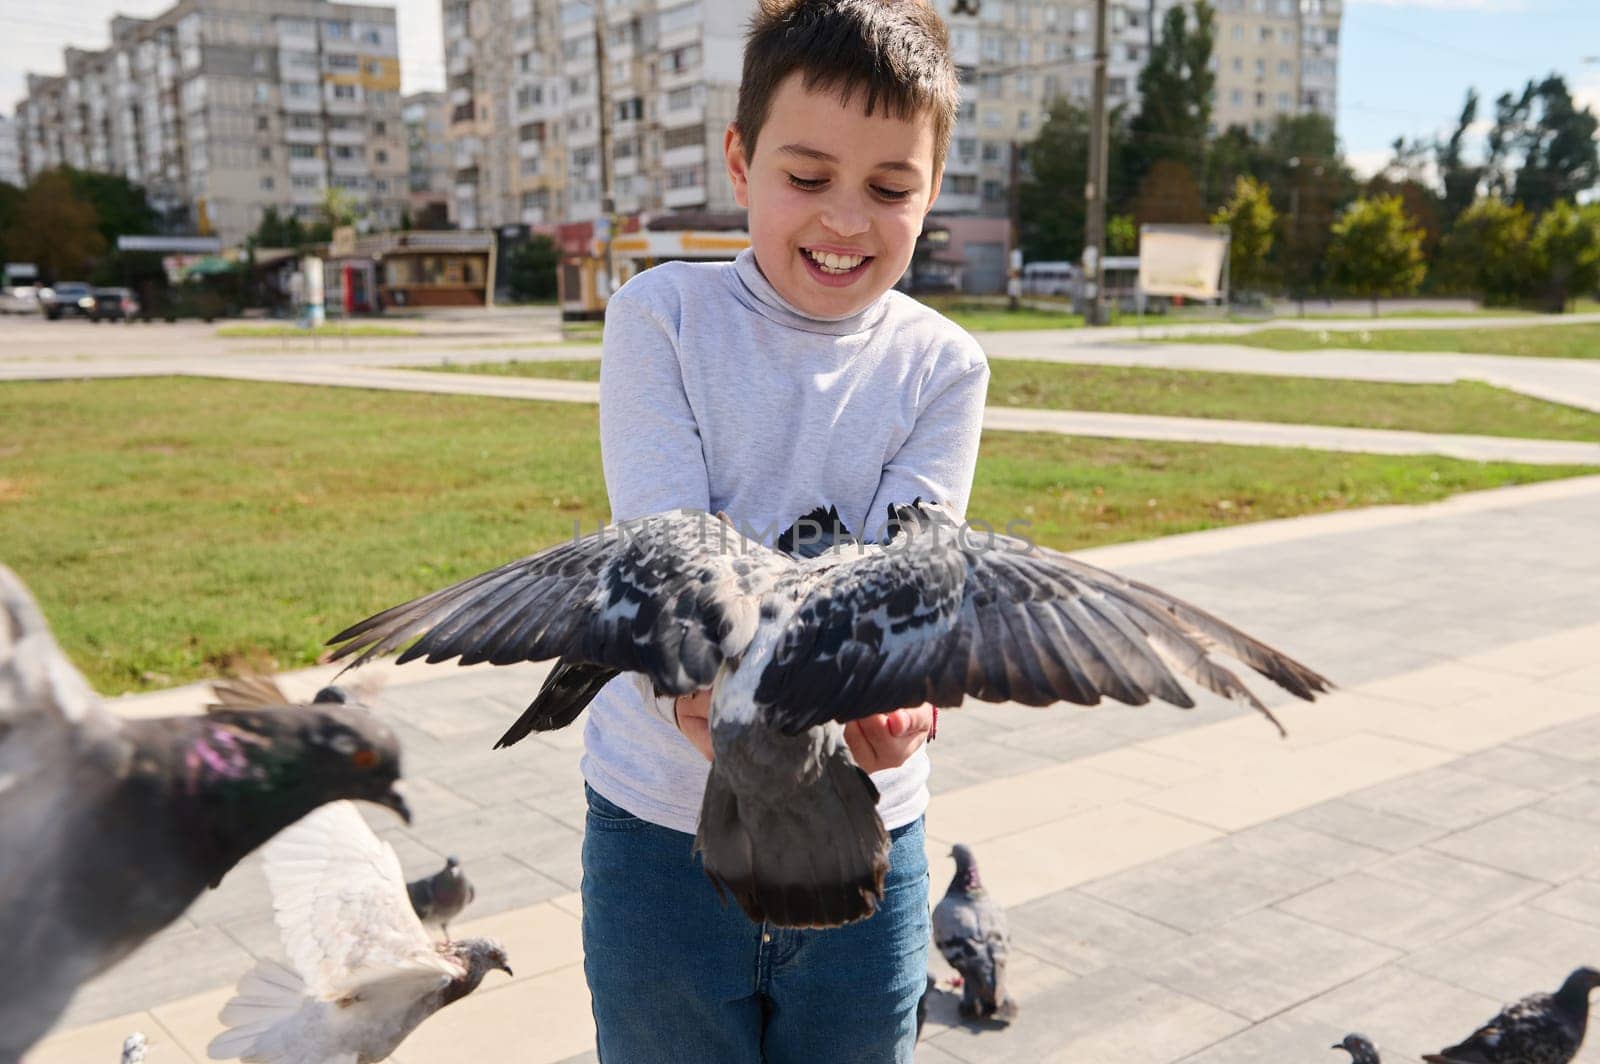 Adorable child boy having fun during family outing, feeding flock of flying doves to his hands, taking care for animals by artgf